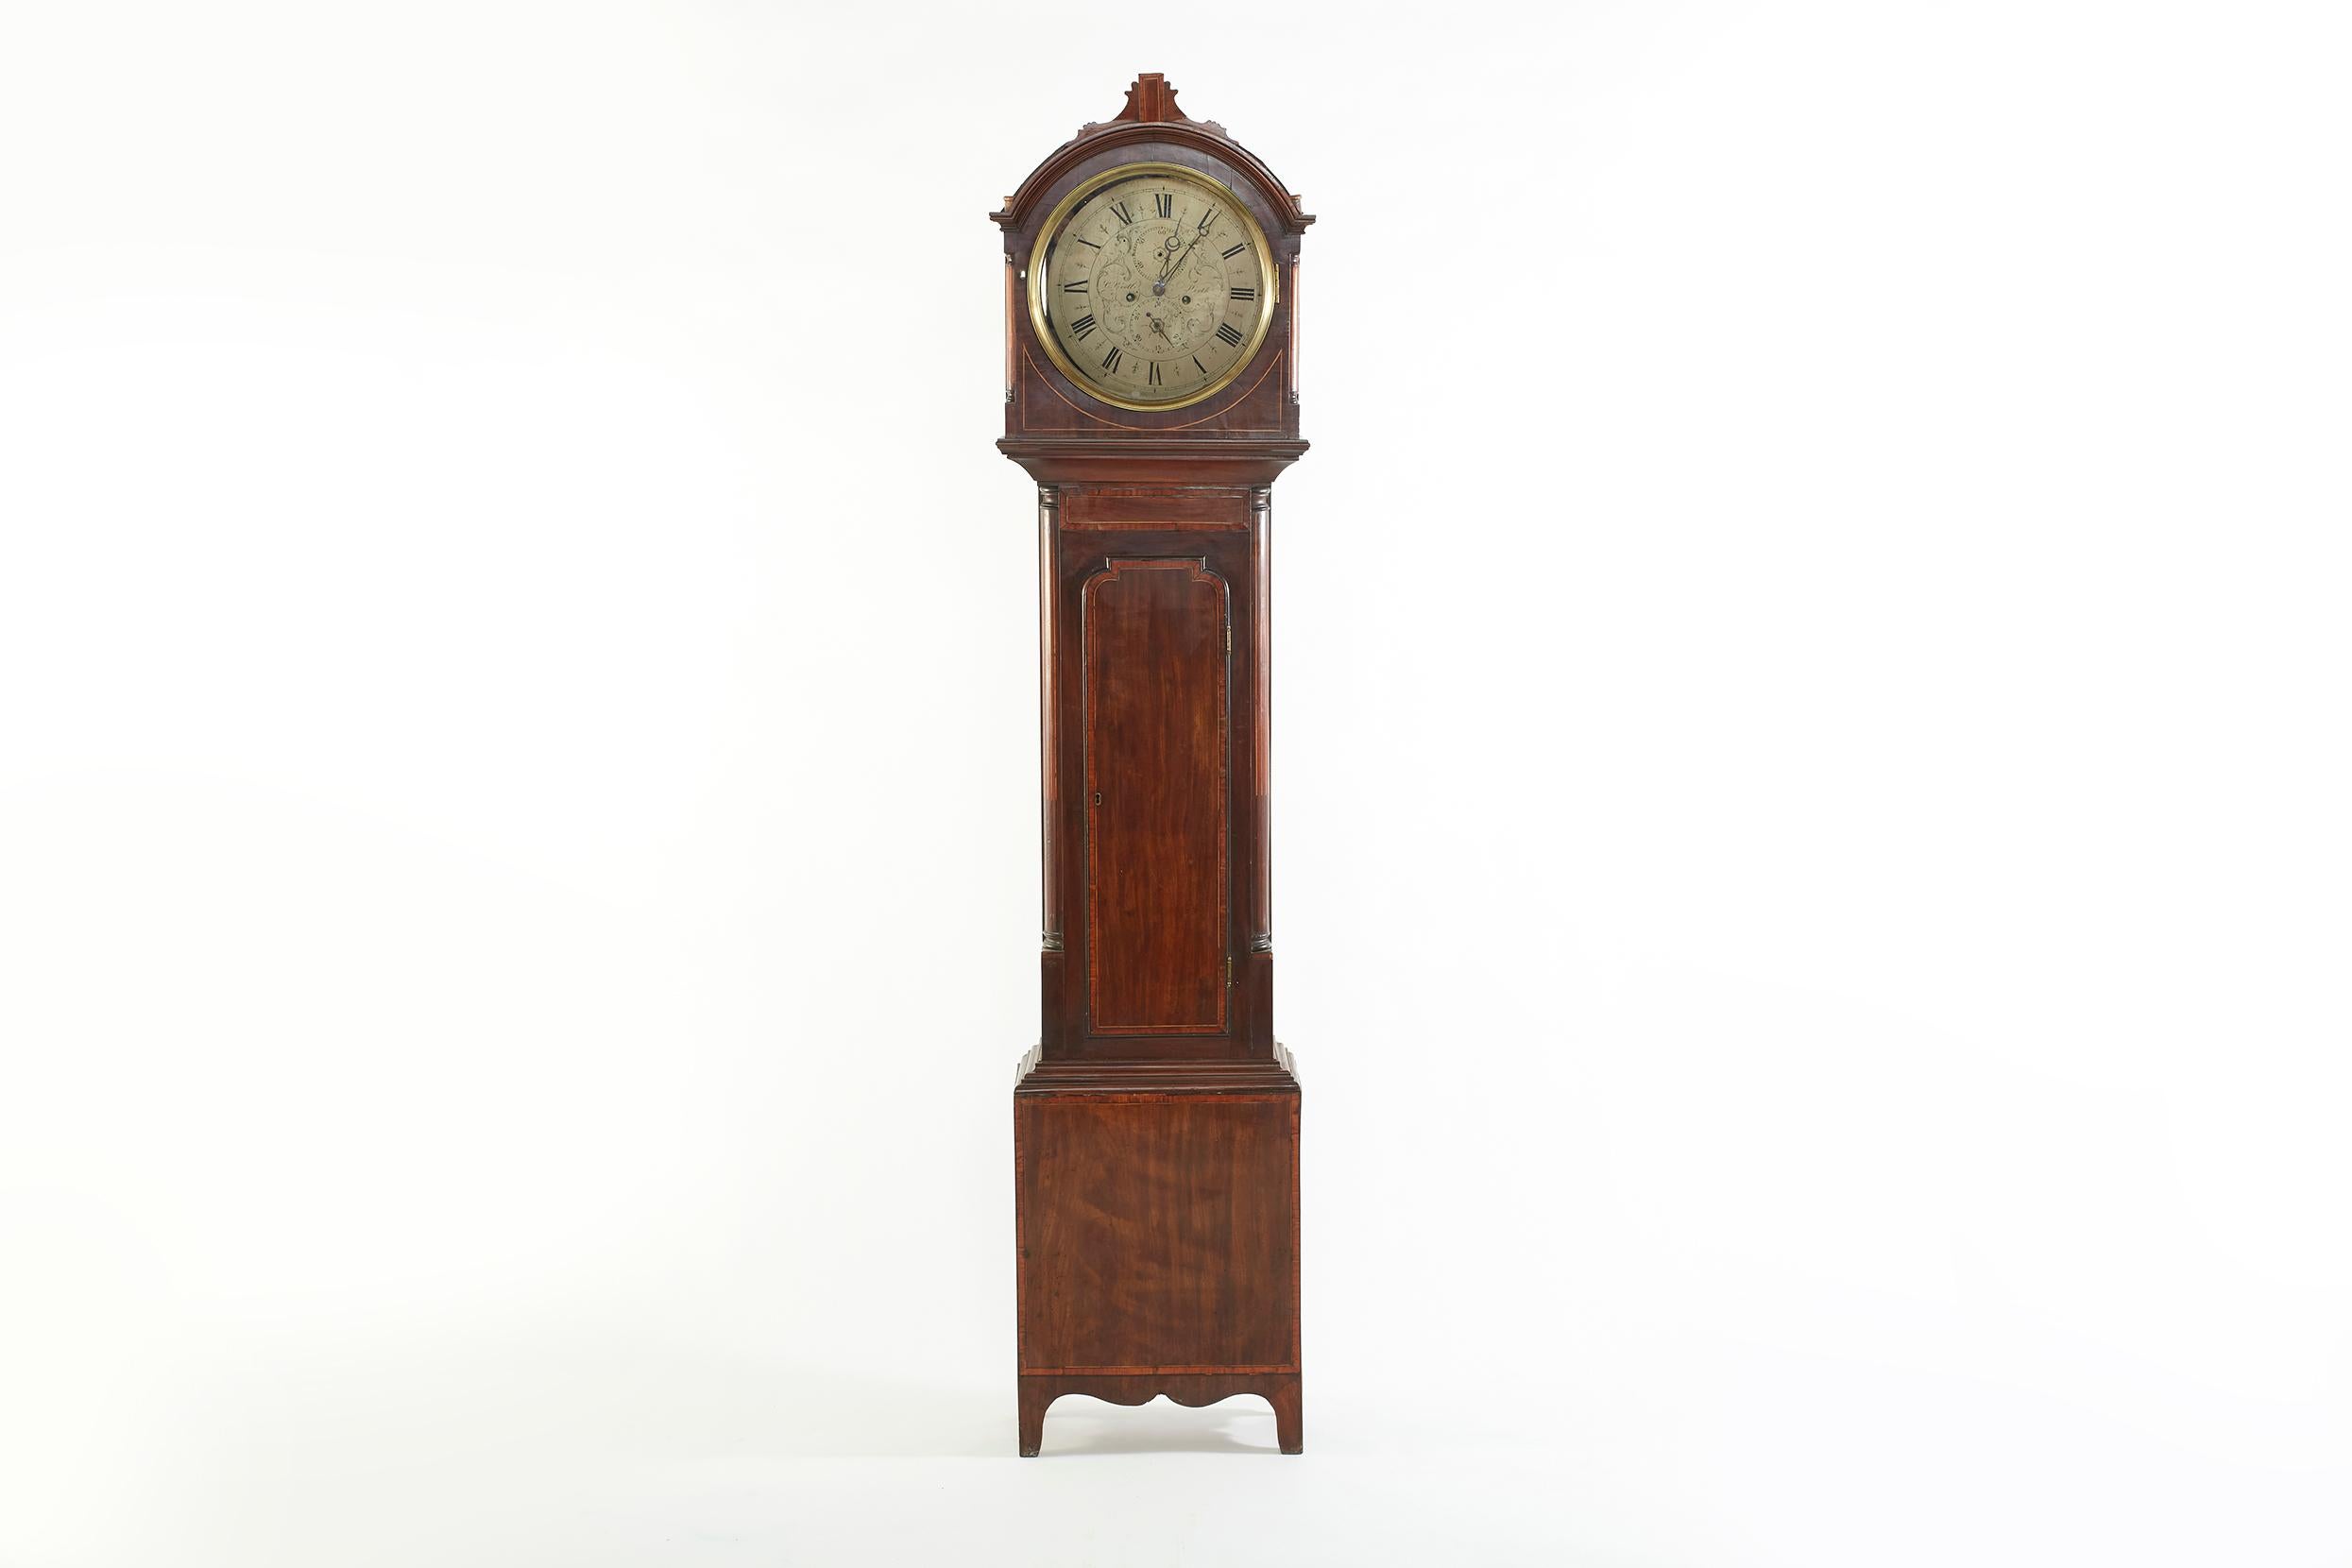 18th century Colin Croll Scottish drumhead tall case clock in mahogany case with banded veneer panels. The case clock has brass face 8-day time and strike movement with silvered dial. The clock is in good antique condition with minor wear & loss